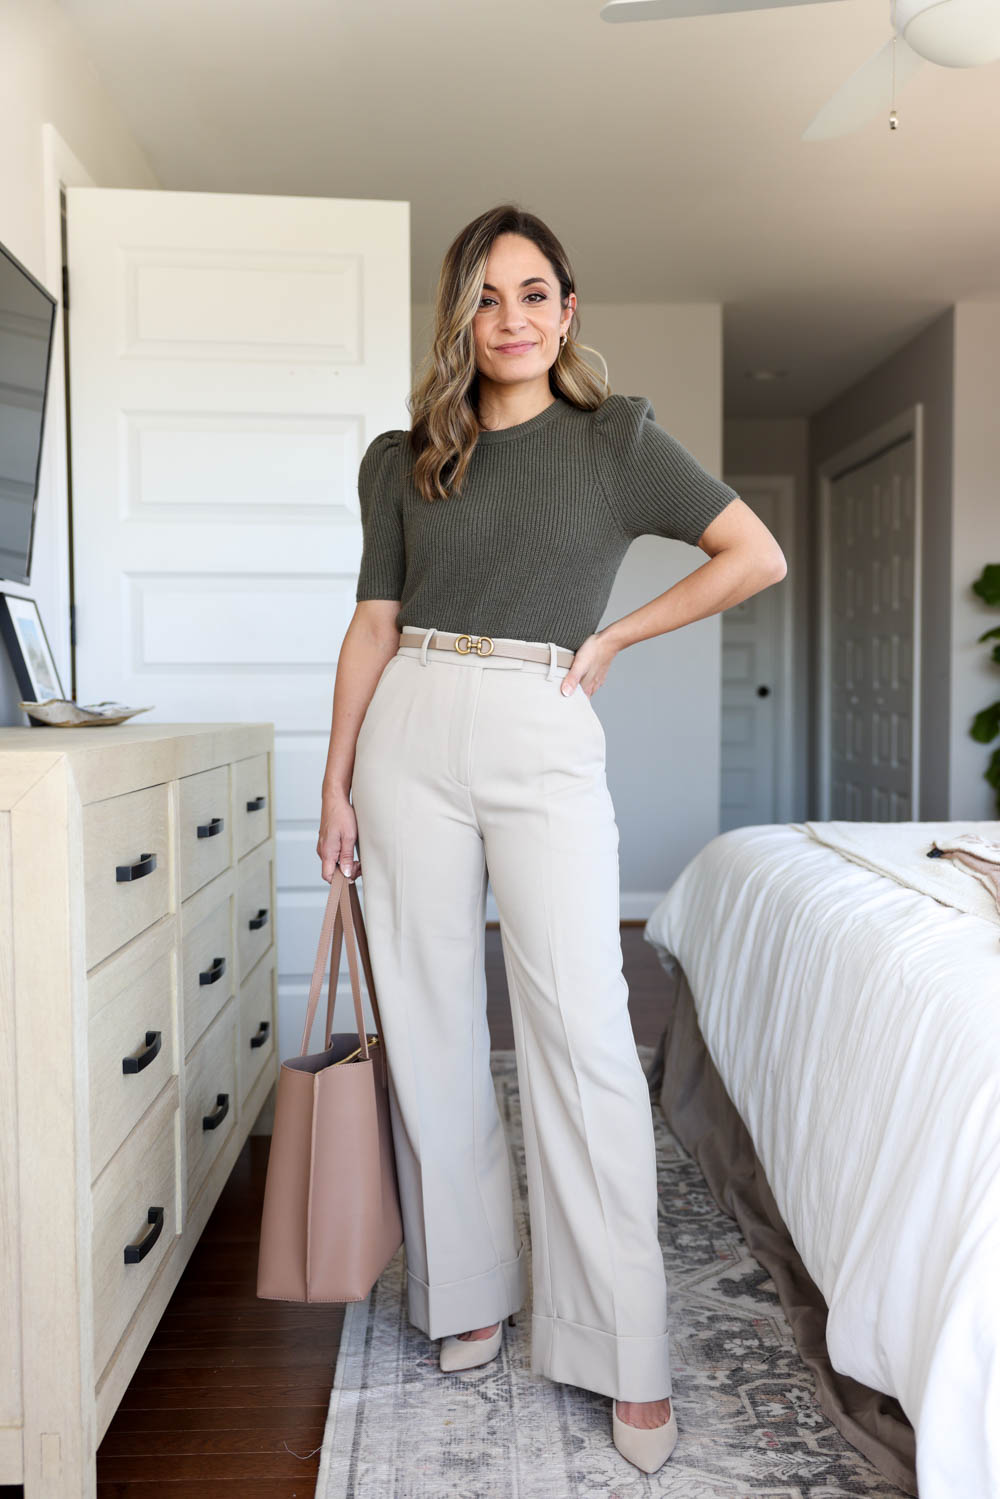 Neutral Outfit Ideas for Work - Pumps & Push Ups